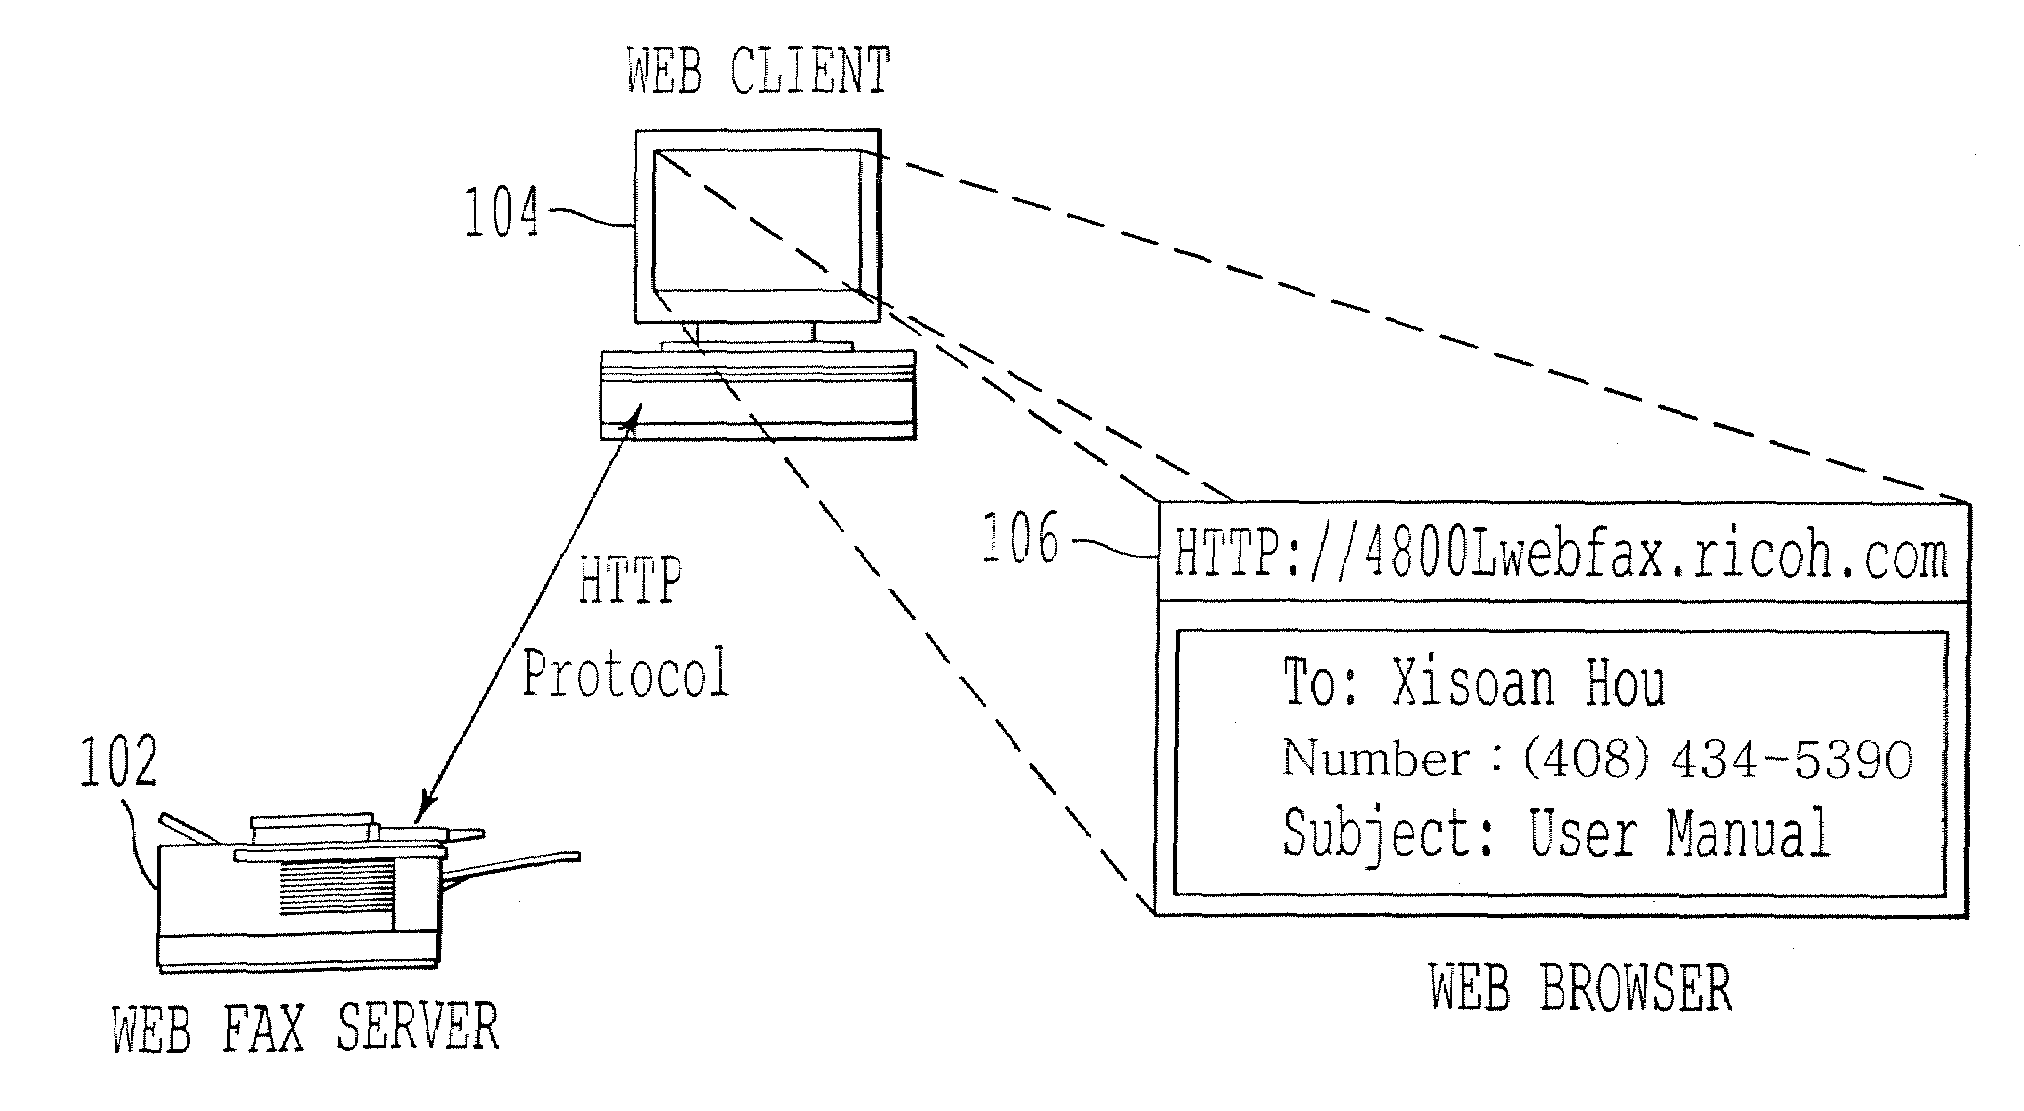 Network fax machine using a web page as a user interface